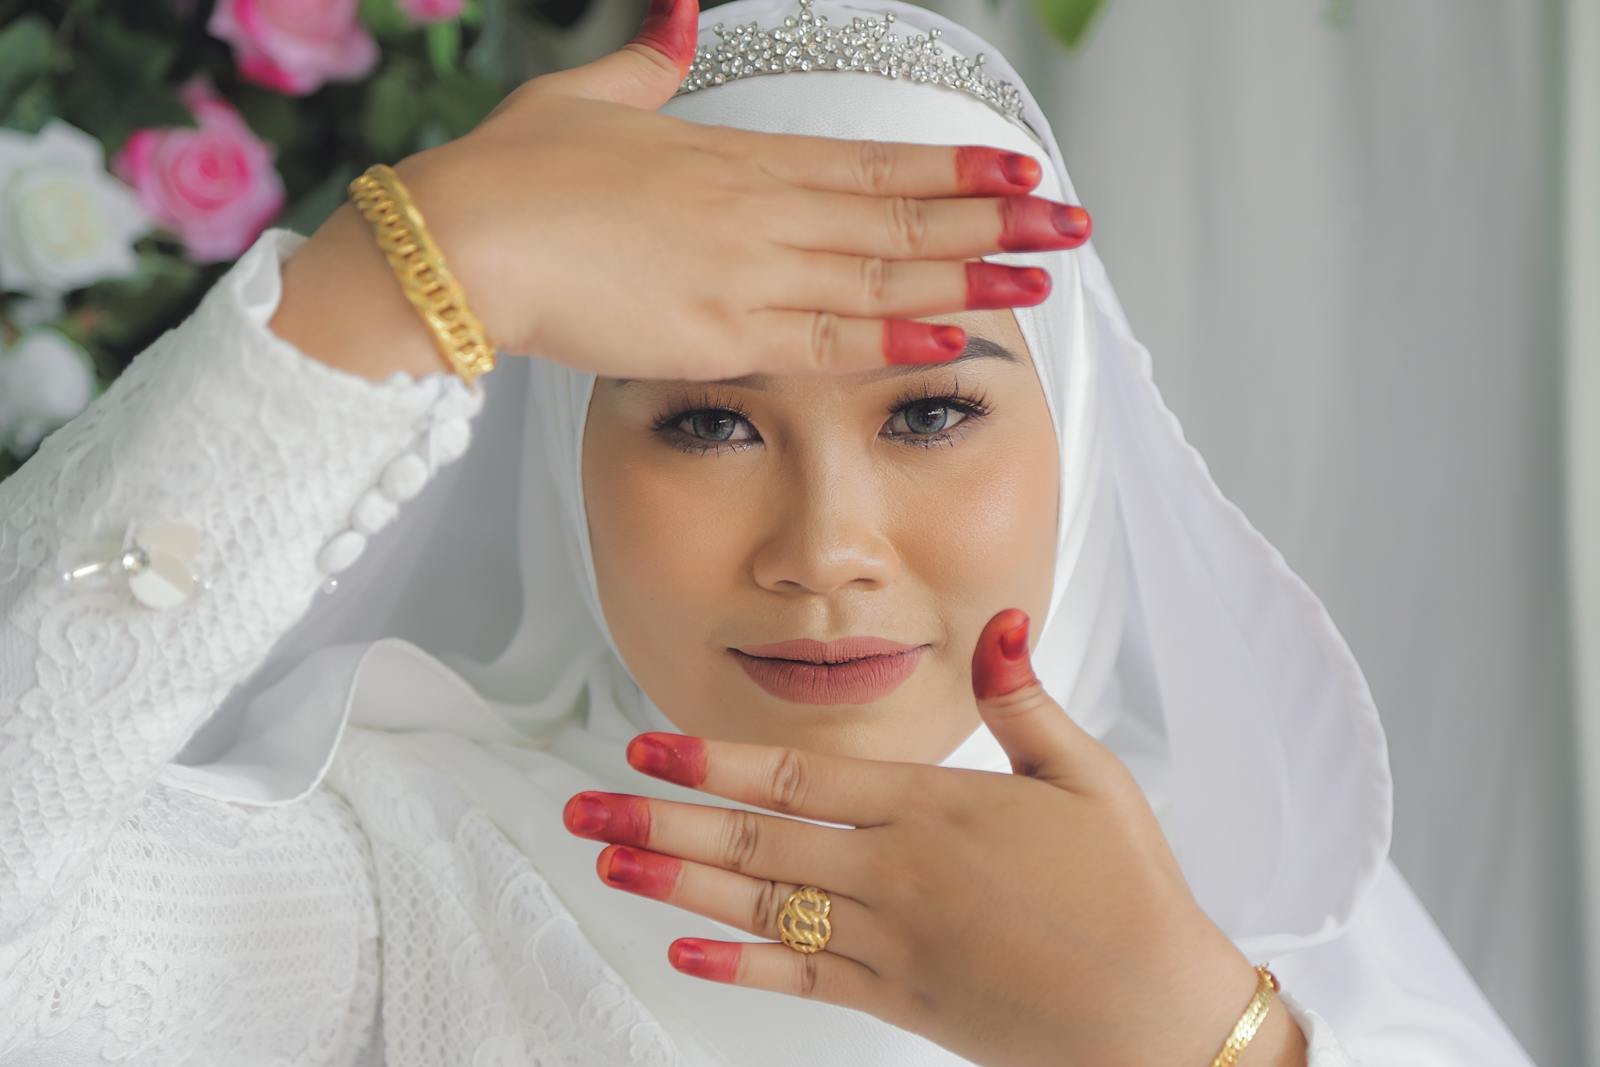 joyas en bronce con baño en oro, A Woman in White Hijab Showing Her Hands with Red Dye